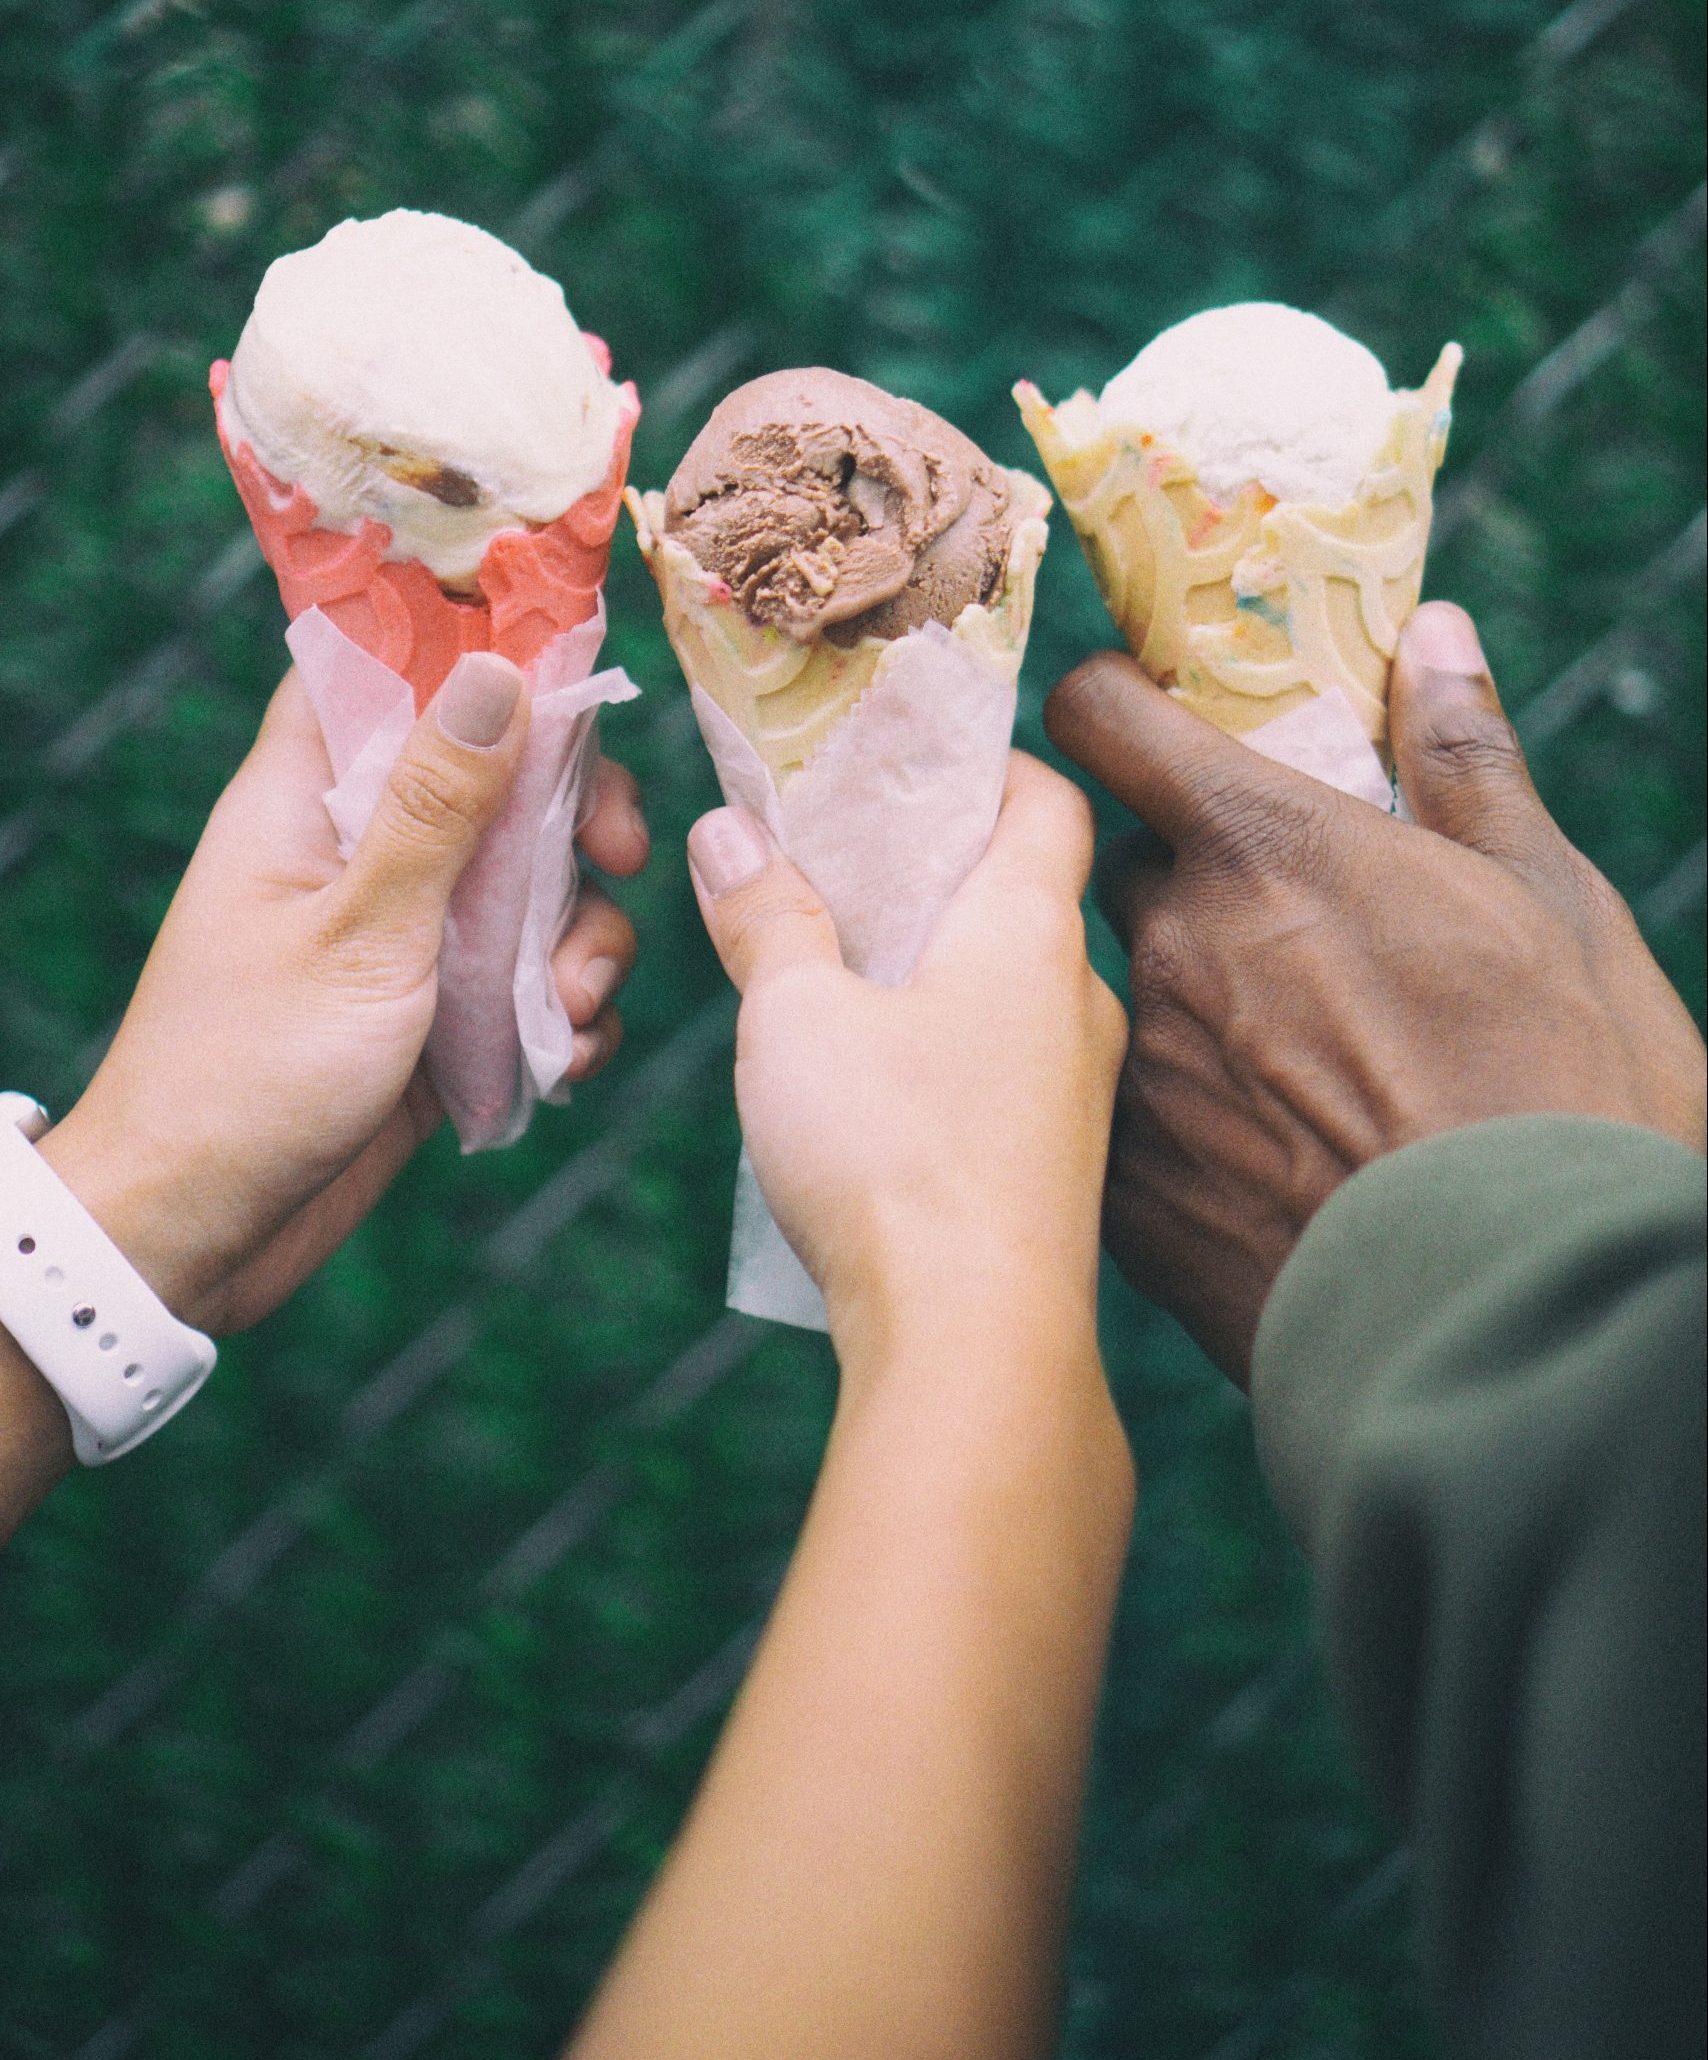 The hands of 3 friends, each holding an ice cream cone.